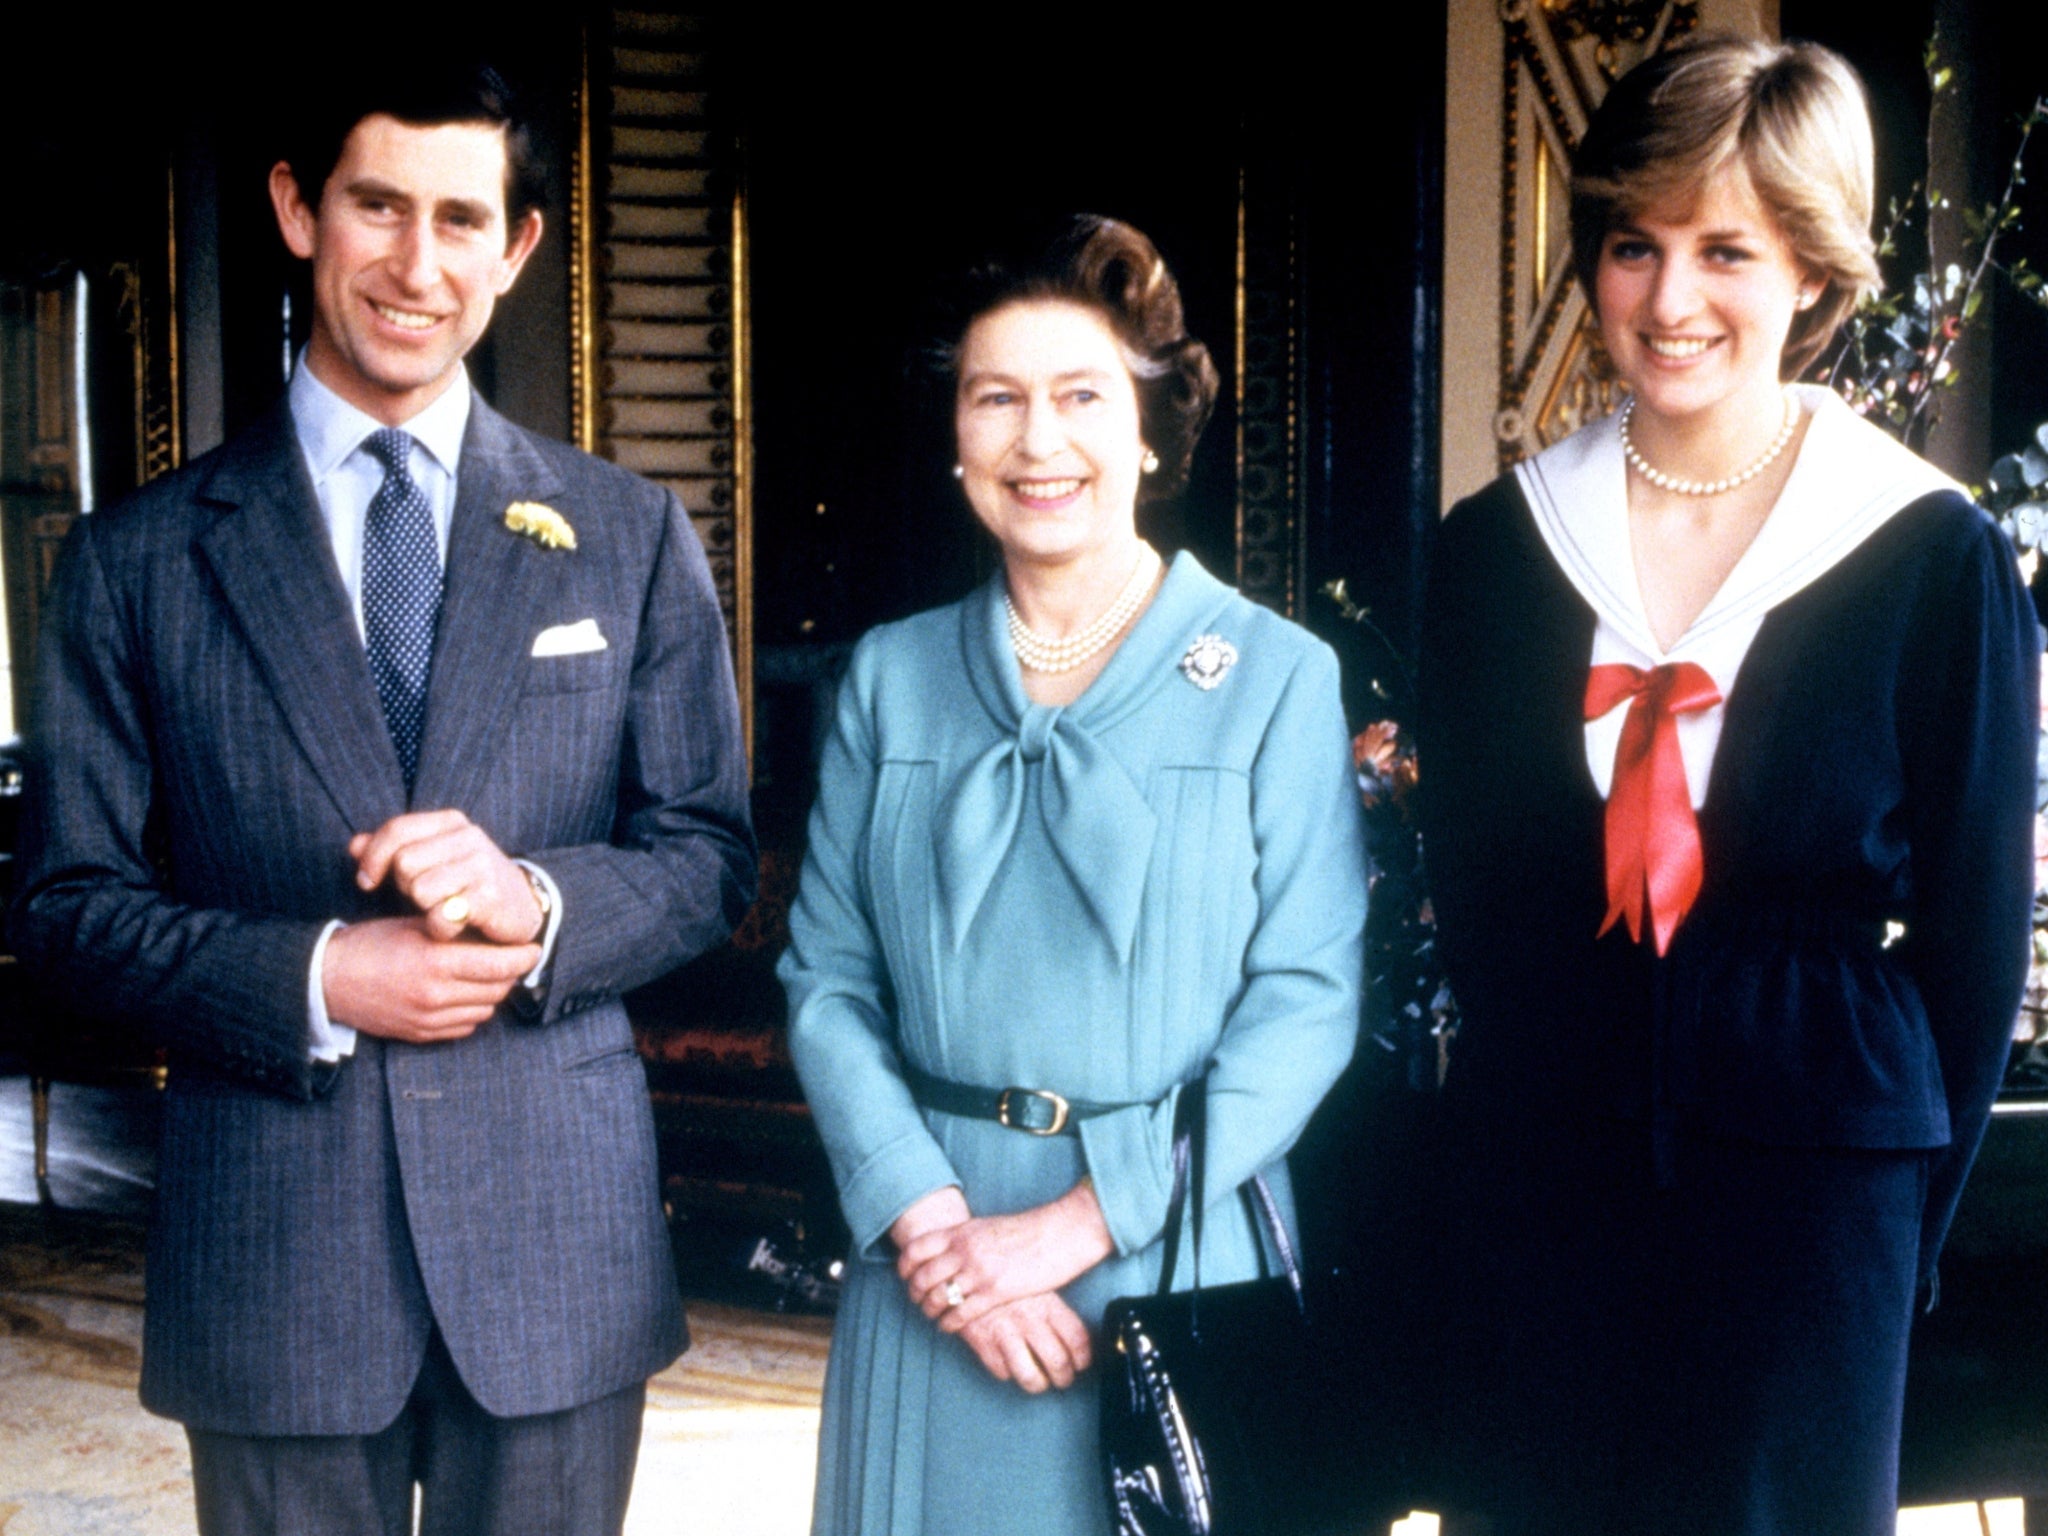 Prince Charles, the Queen and Princess Diana after Charles and Diana announced their engagement in 1981